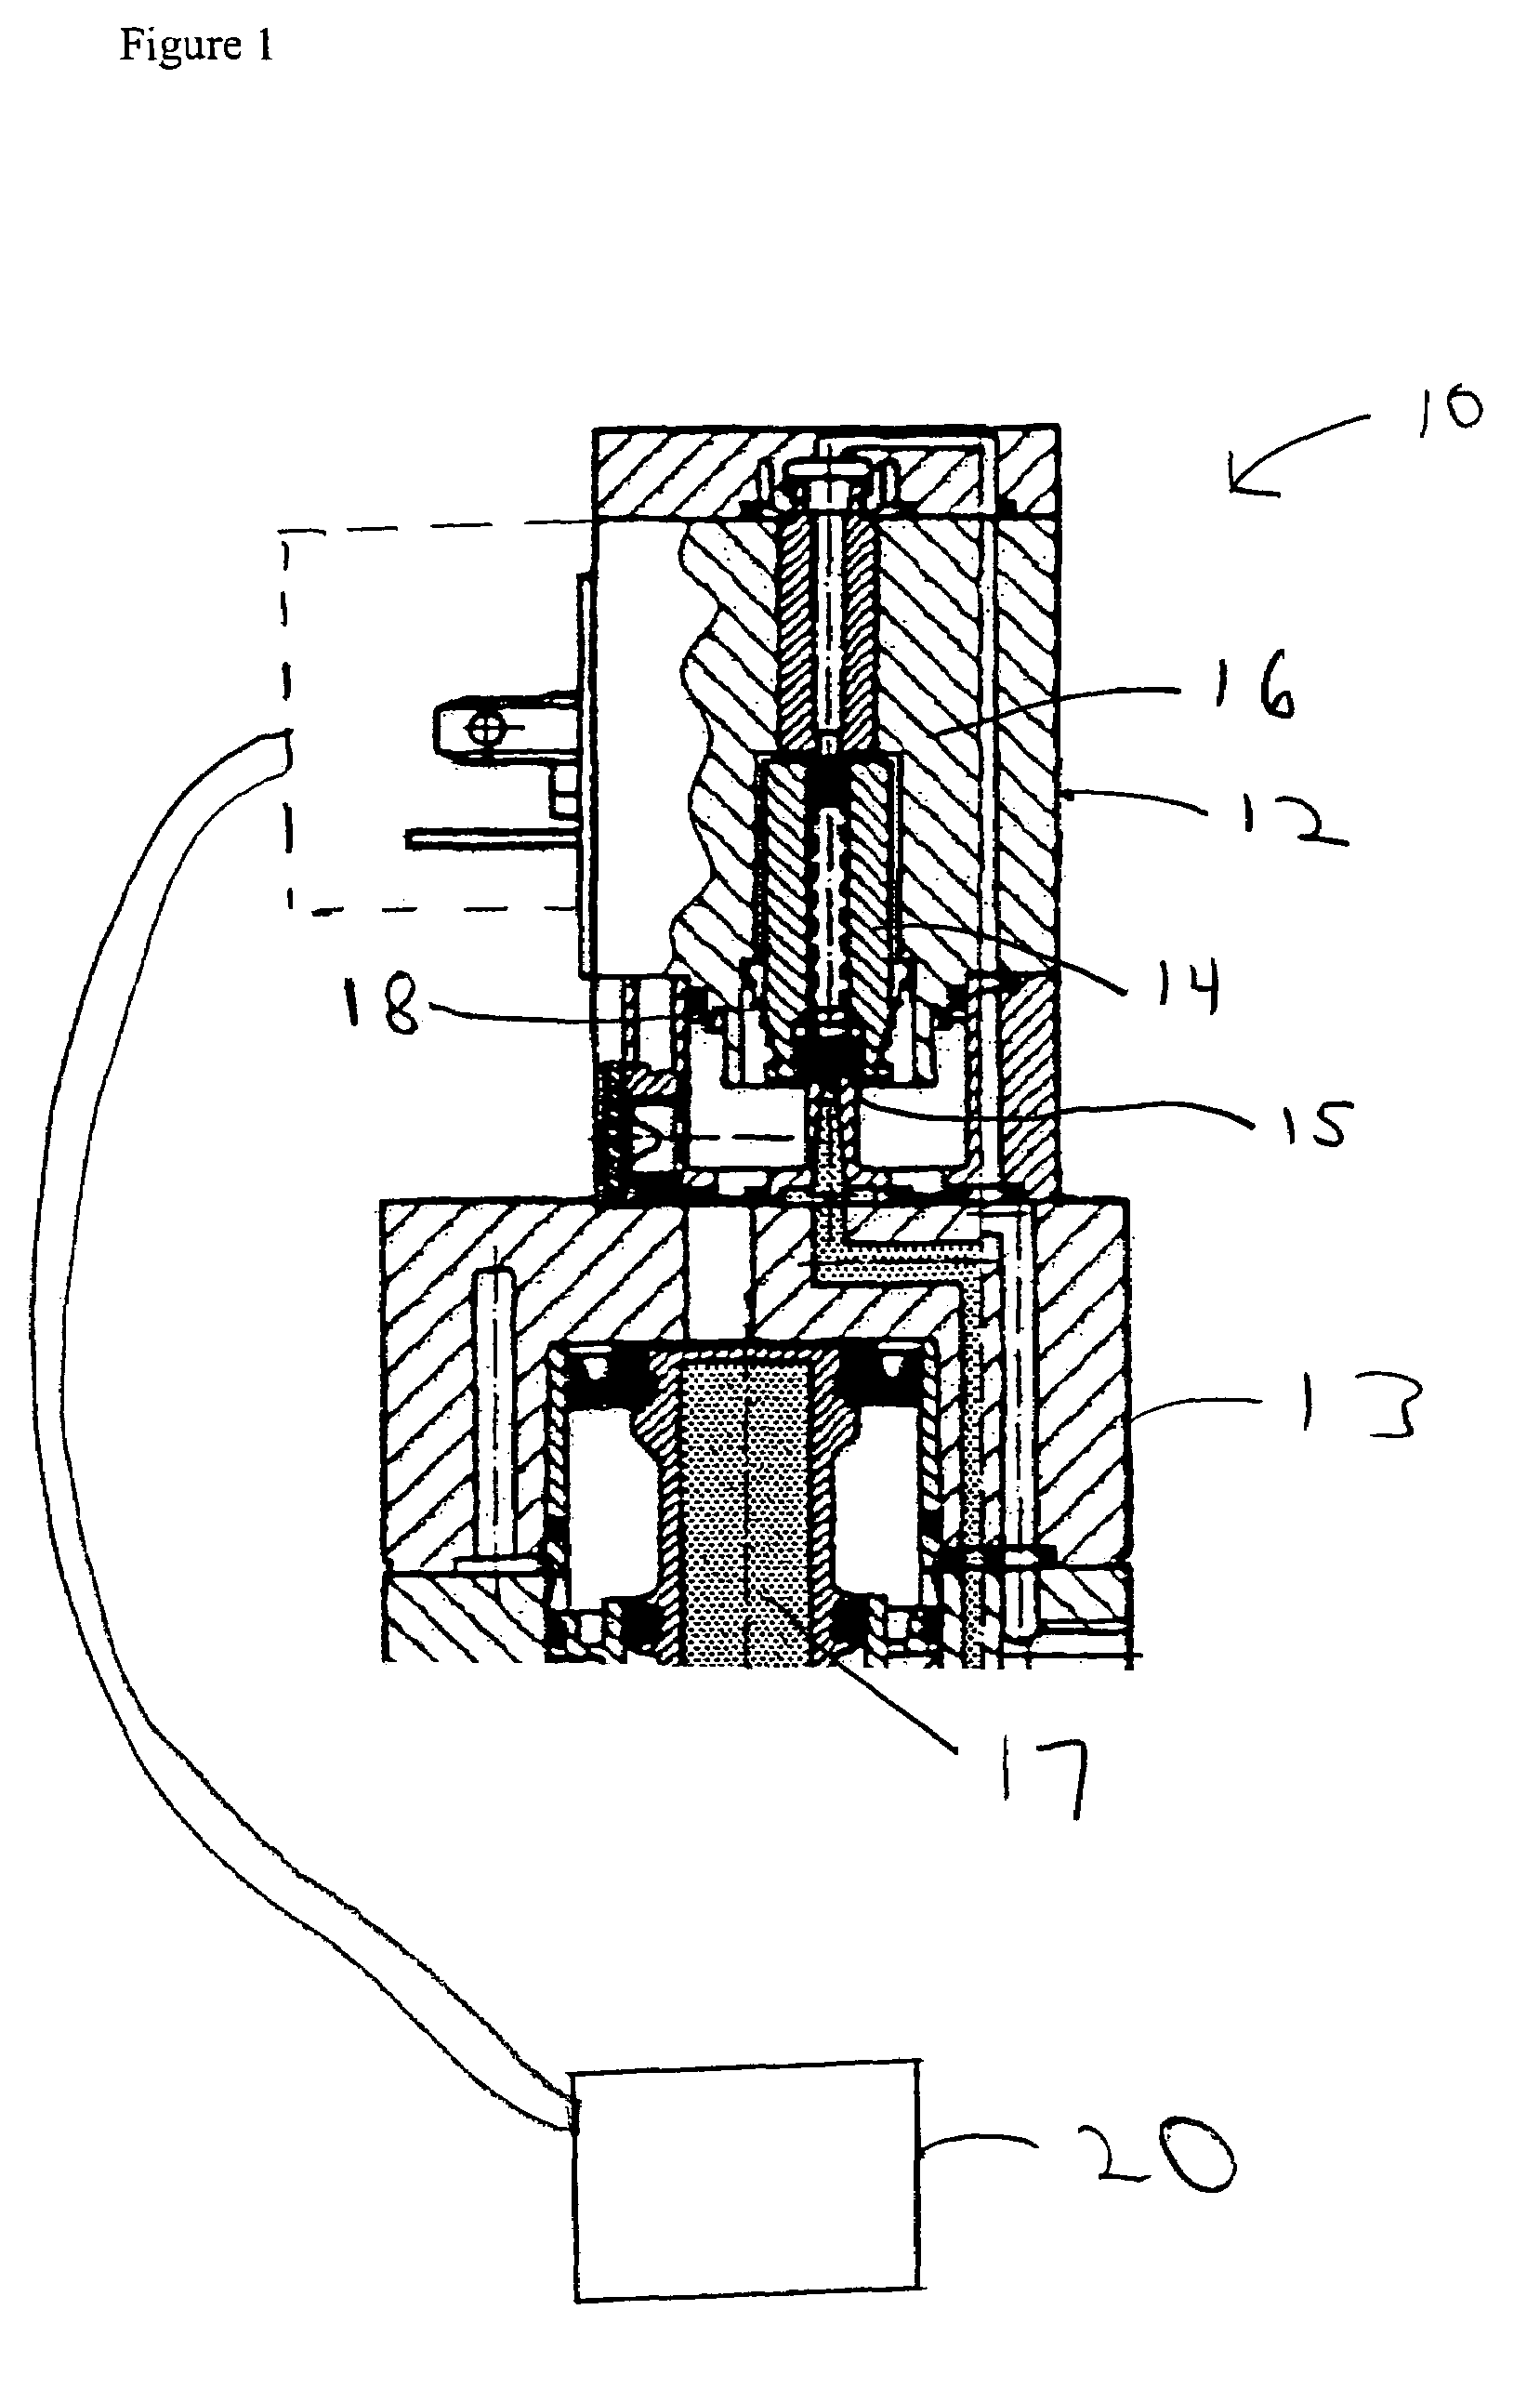 Method and apparatus for monitoring and determining the functional status of an electromagnetic valve